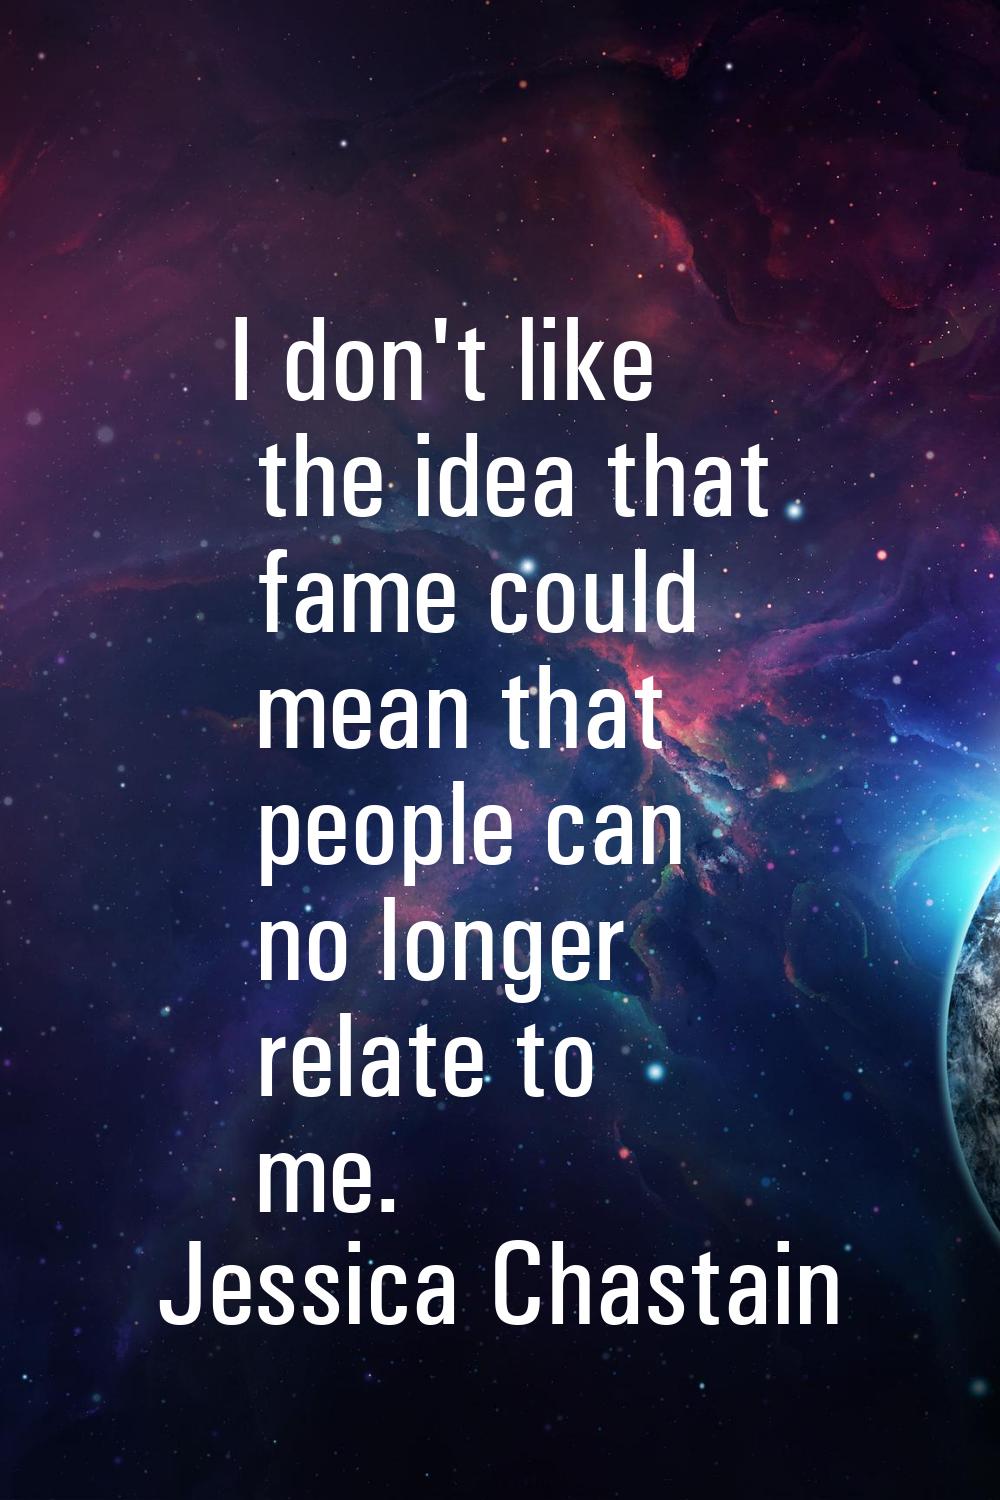 I don't like the idea that fame could mean that people can no longer relate to me.